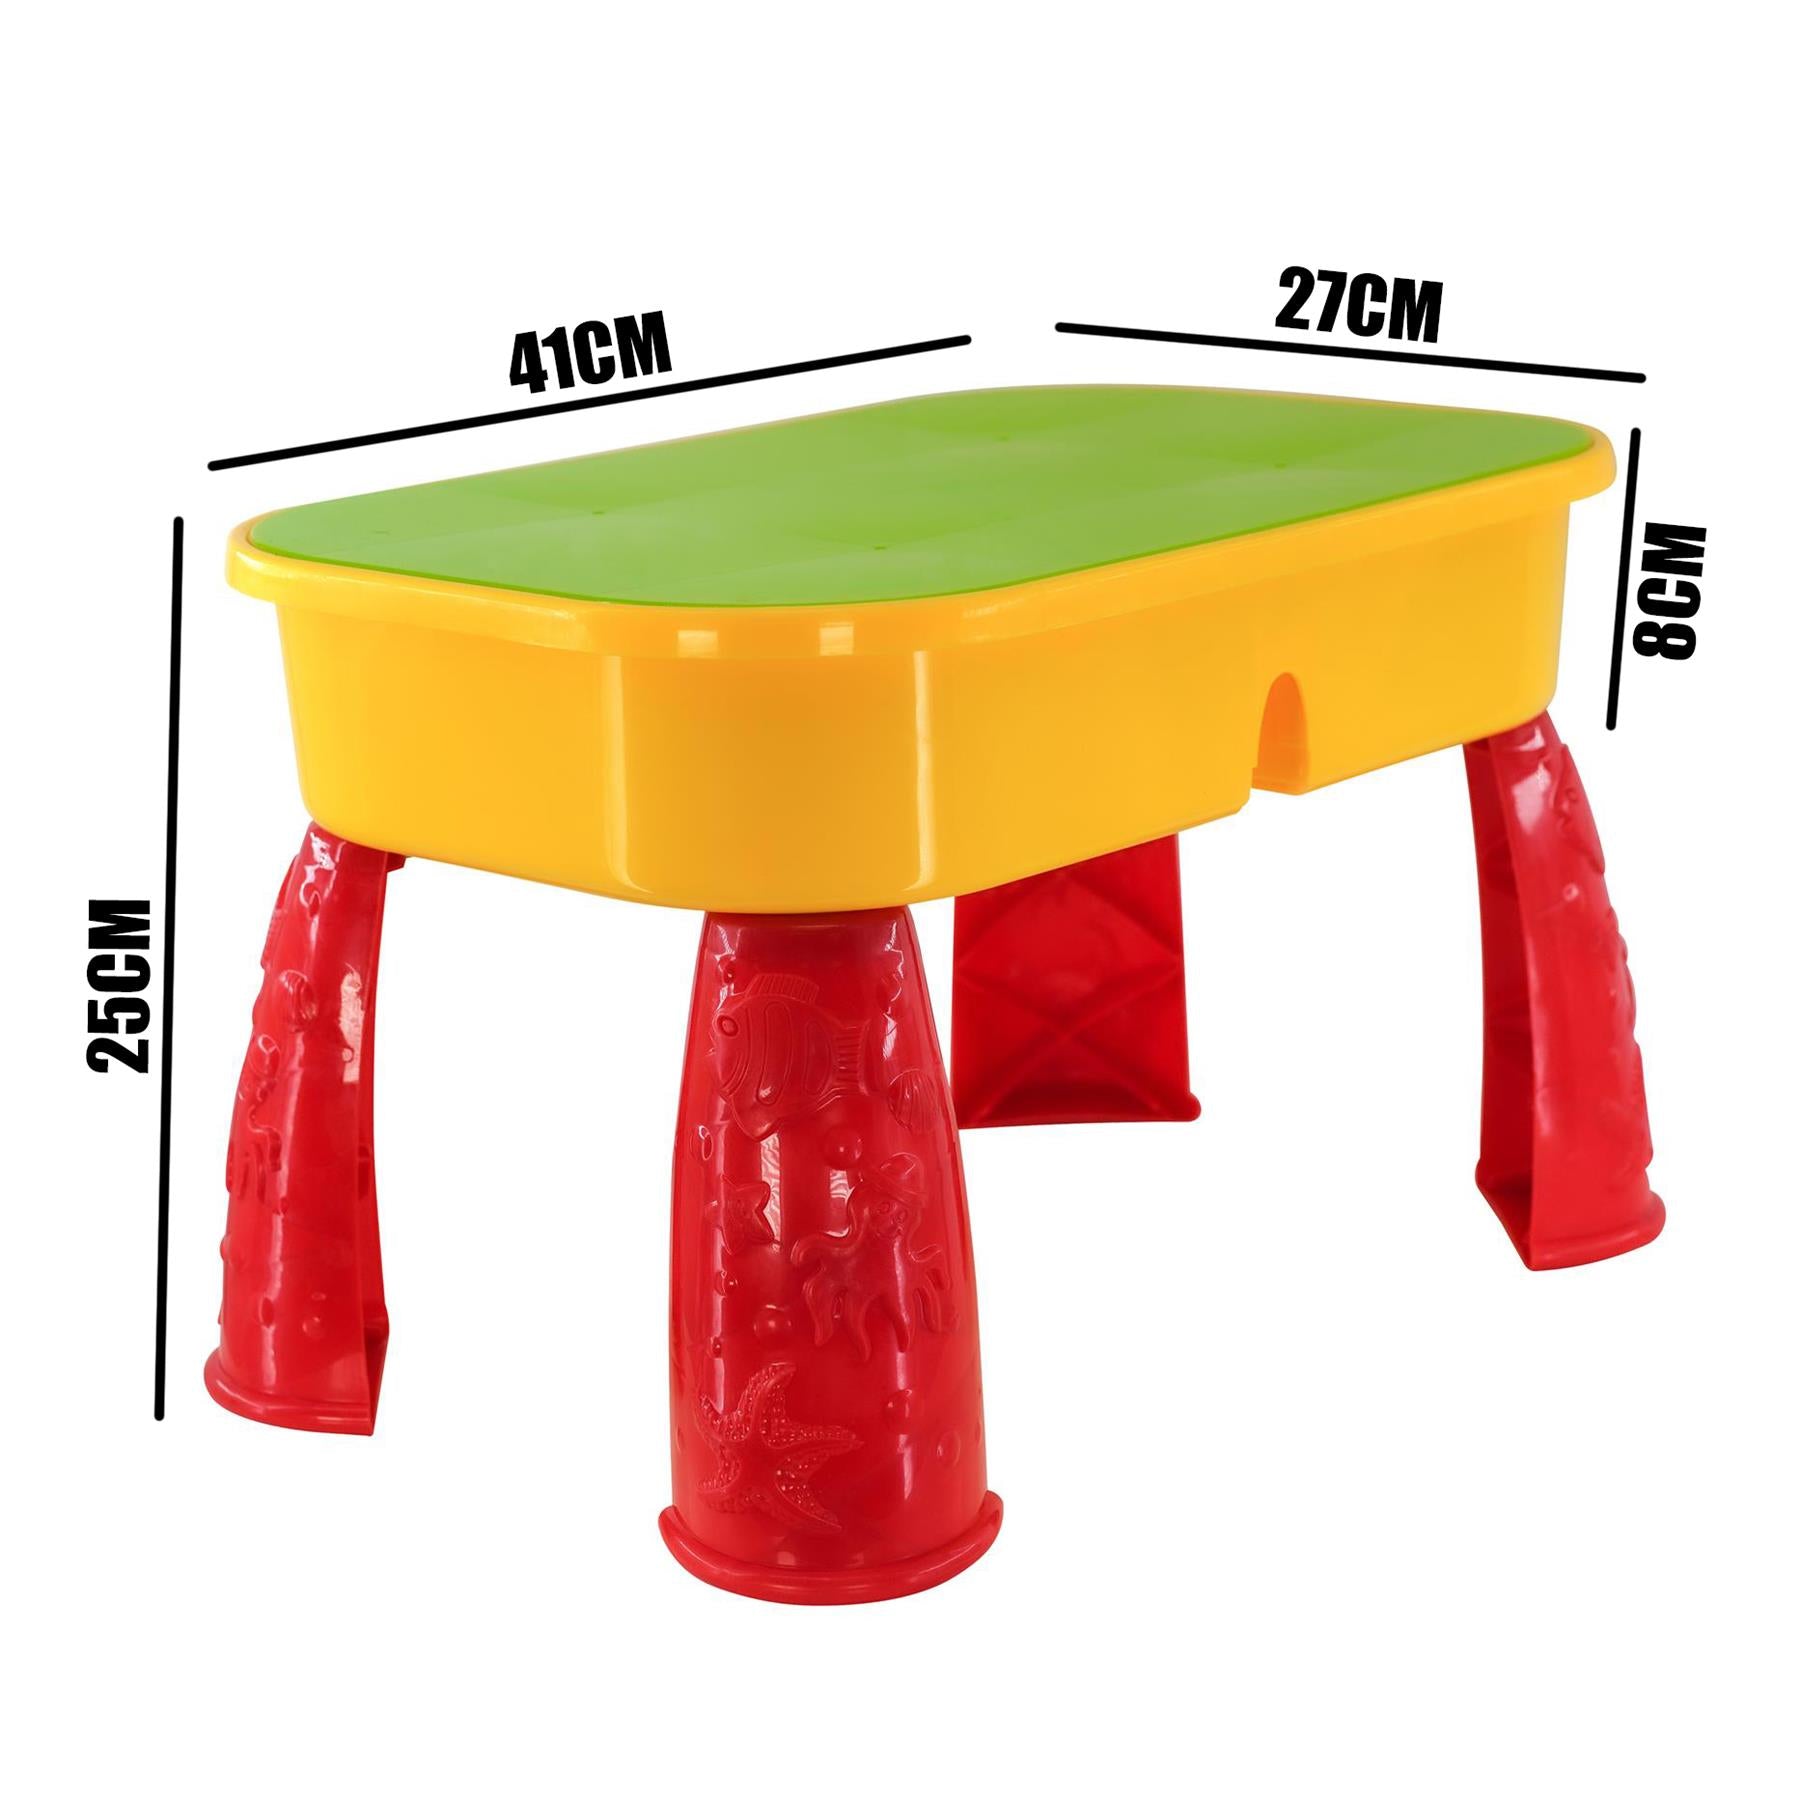 Sand and Water Table by The Magic Toy Shop - UKBuyZone